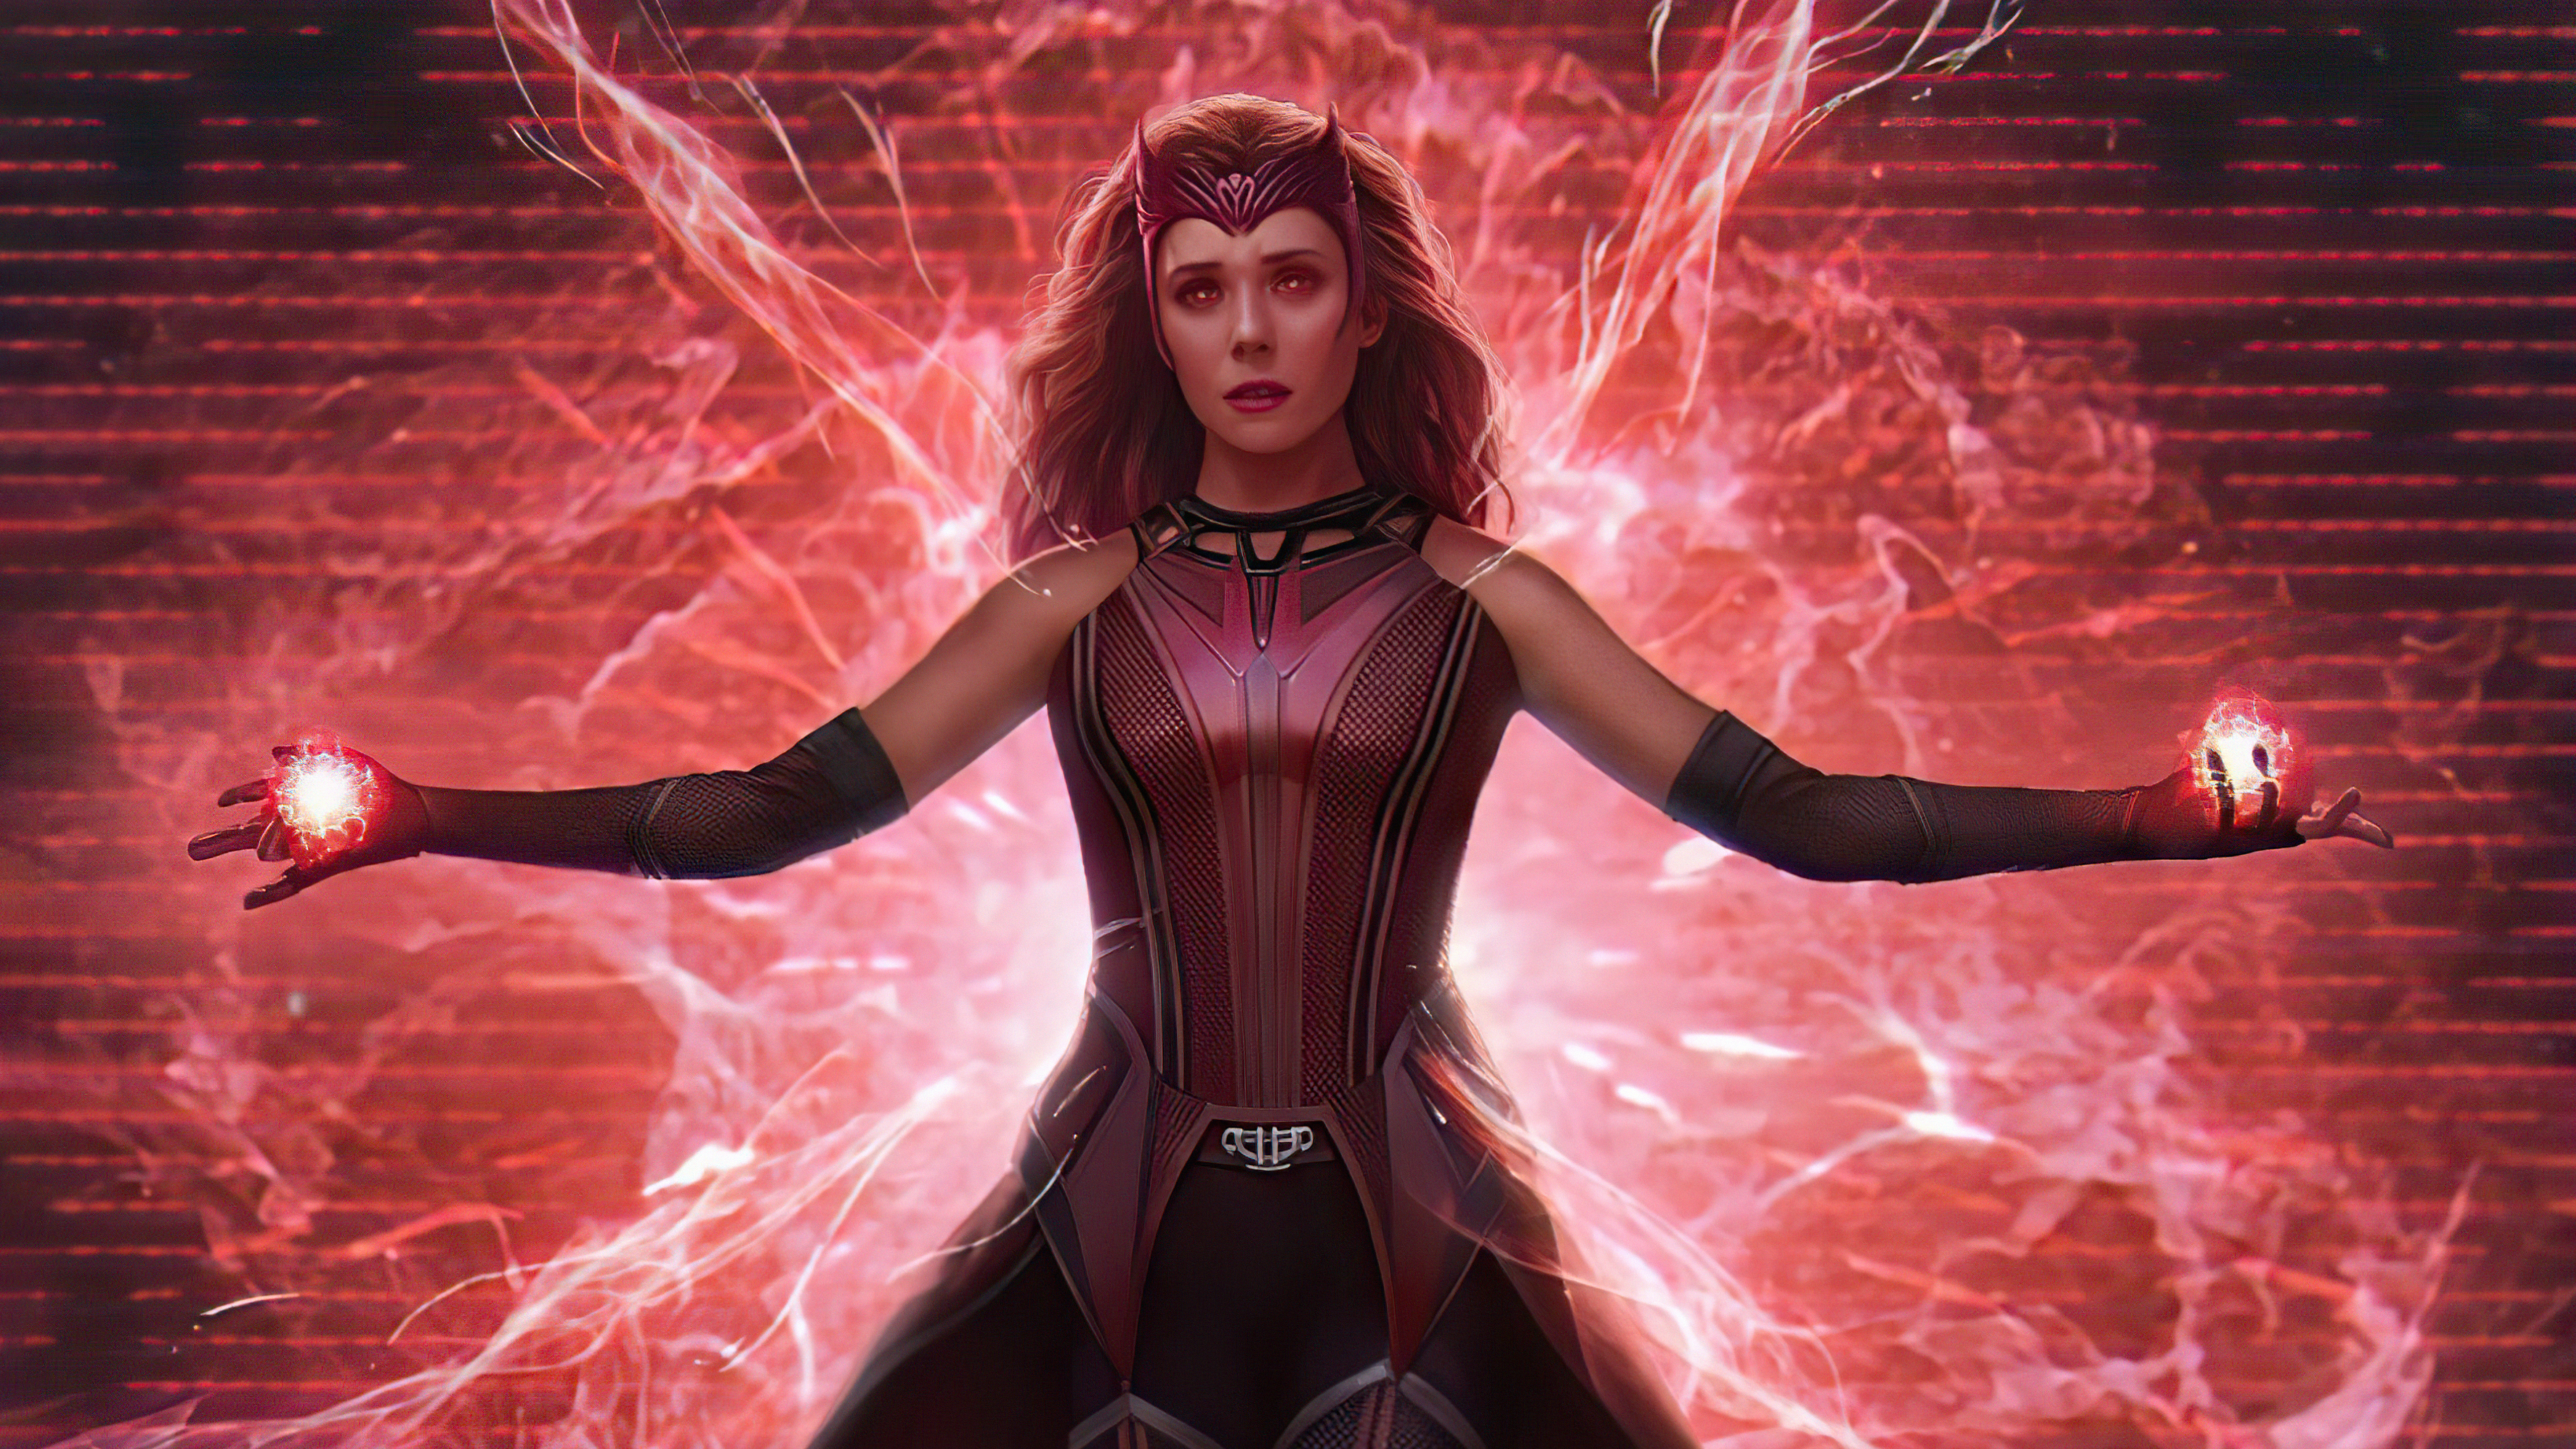 Wallpaper Scarlet Witch, Marvel Scarlet Witch Art, Wanda Maximoff, Hulk,  Vision, Background - Download Free Image